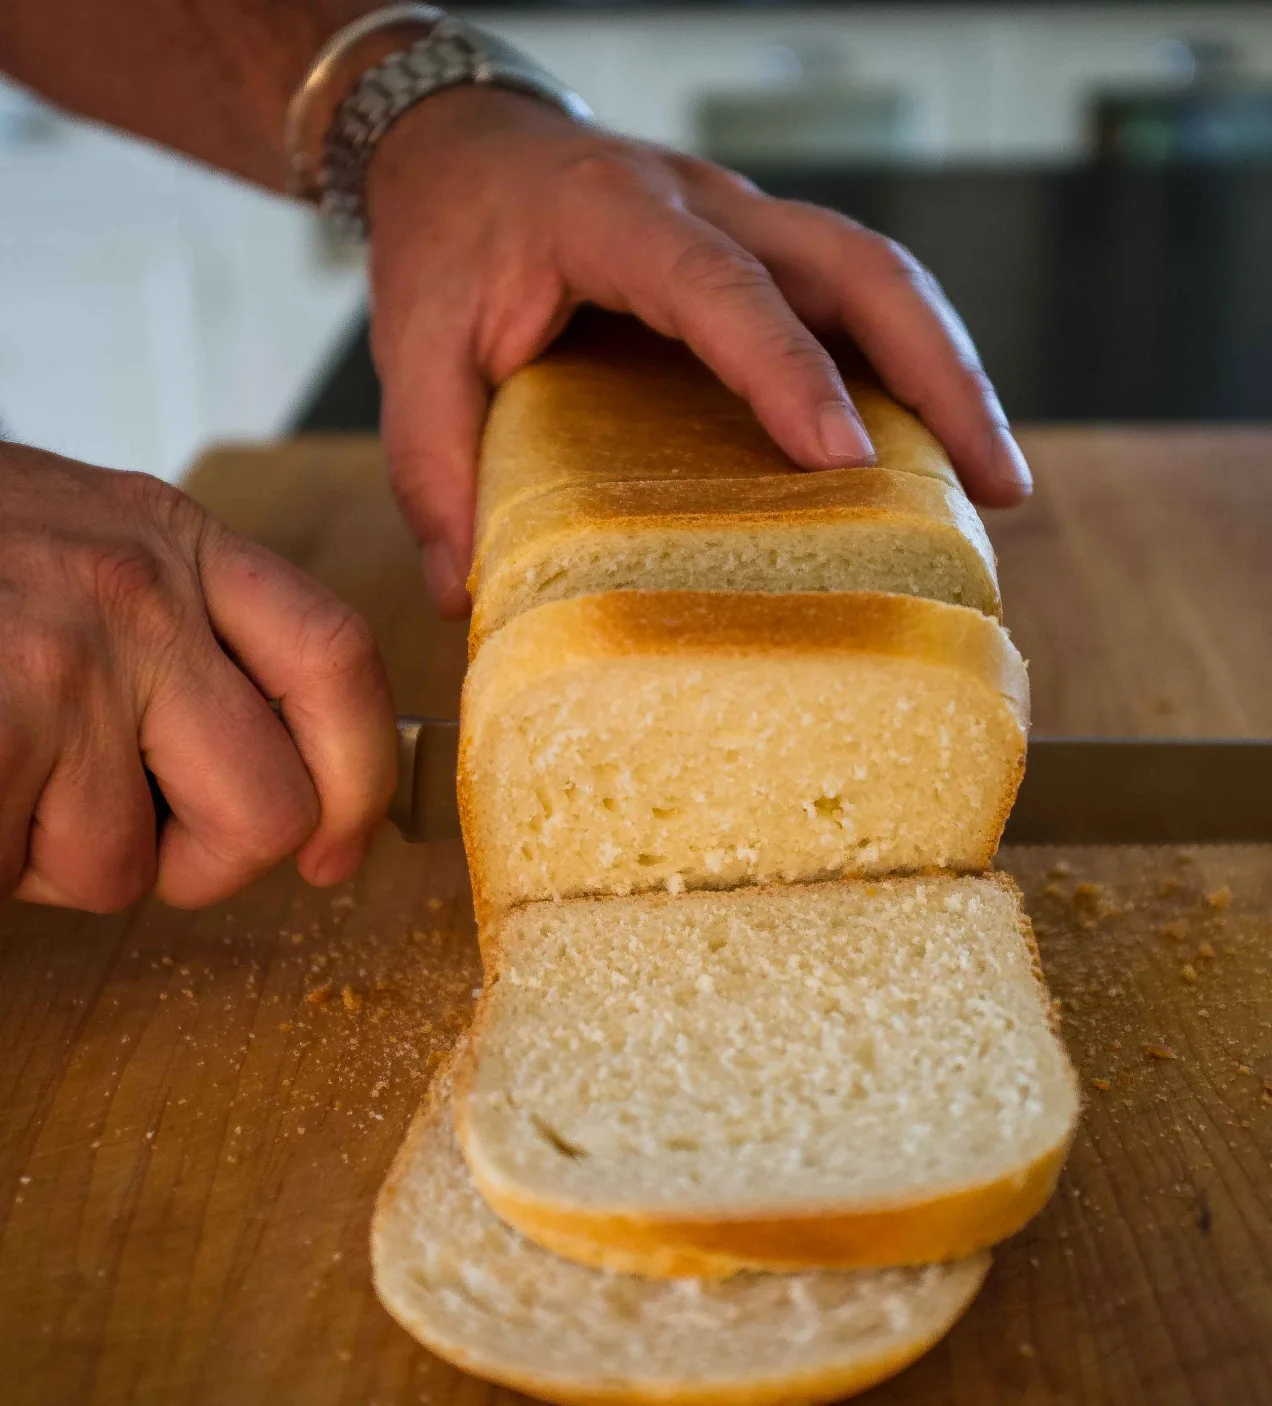 Which bread is a type of Italian bread with a crispy crust and light, airy interior?